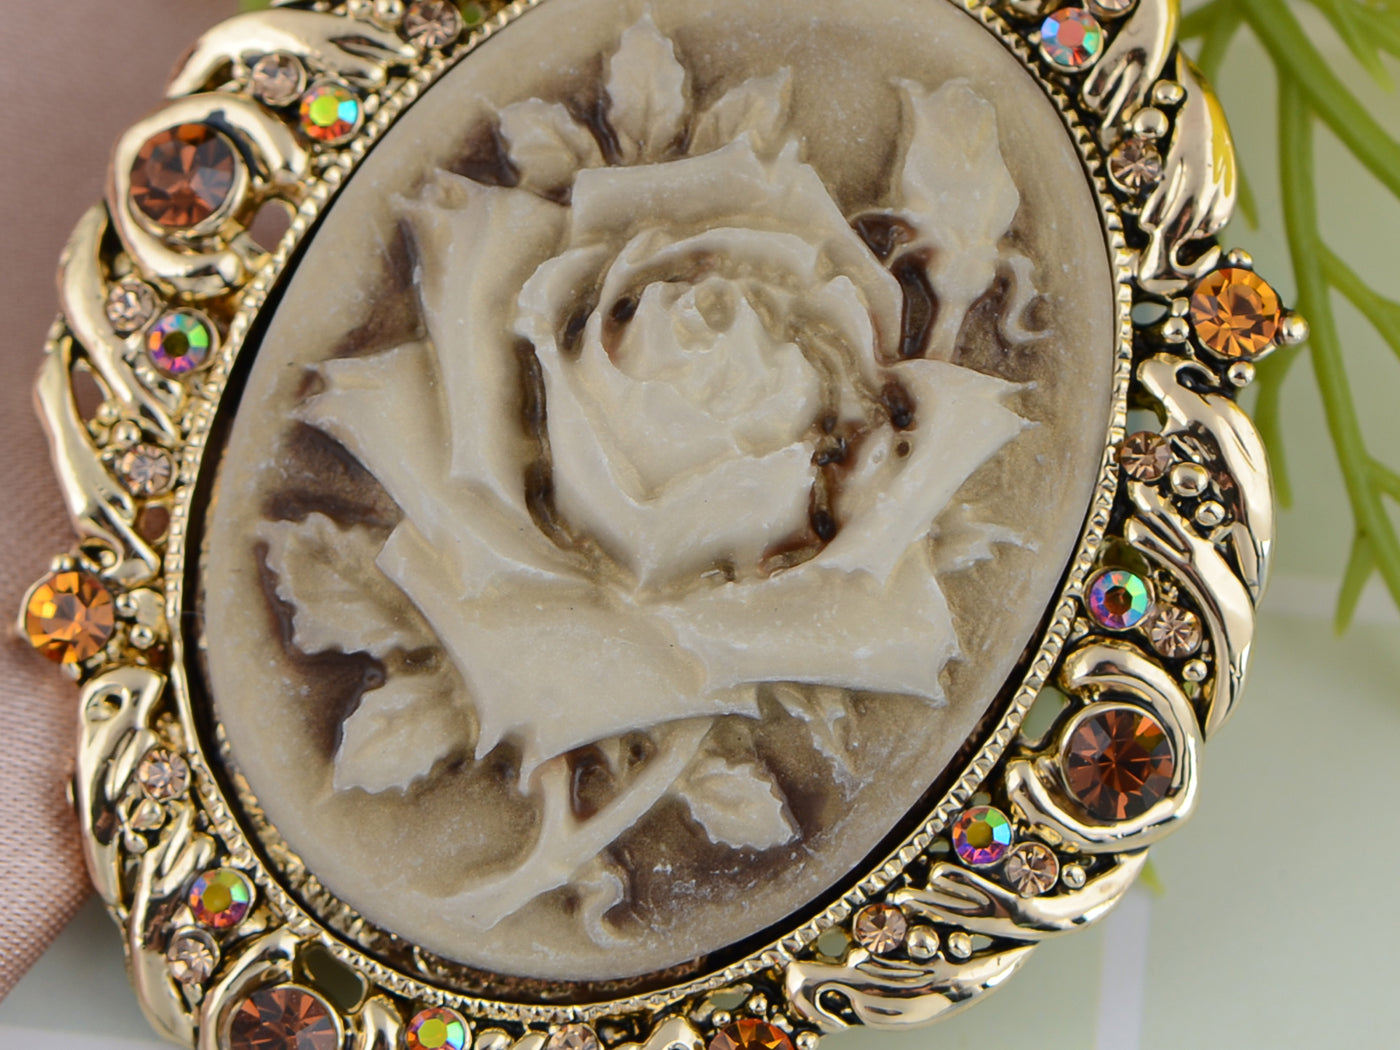 Vintage Antique Reproduct Rose Pink Flower Cameo Pin Brooch